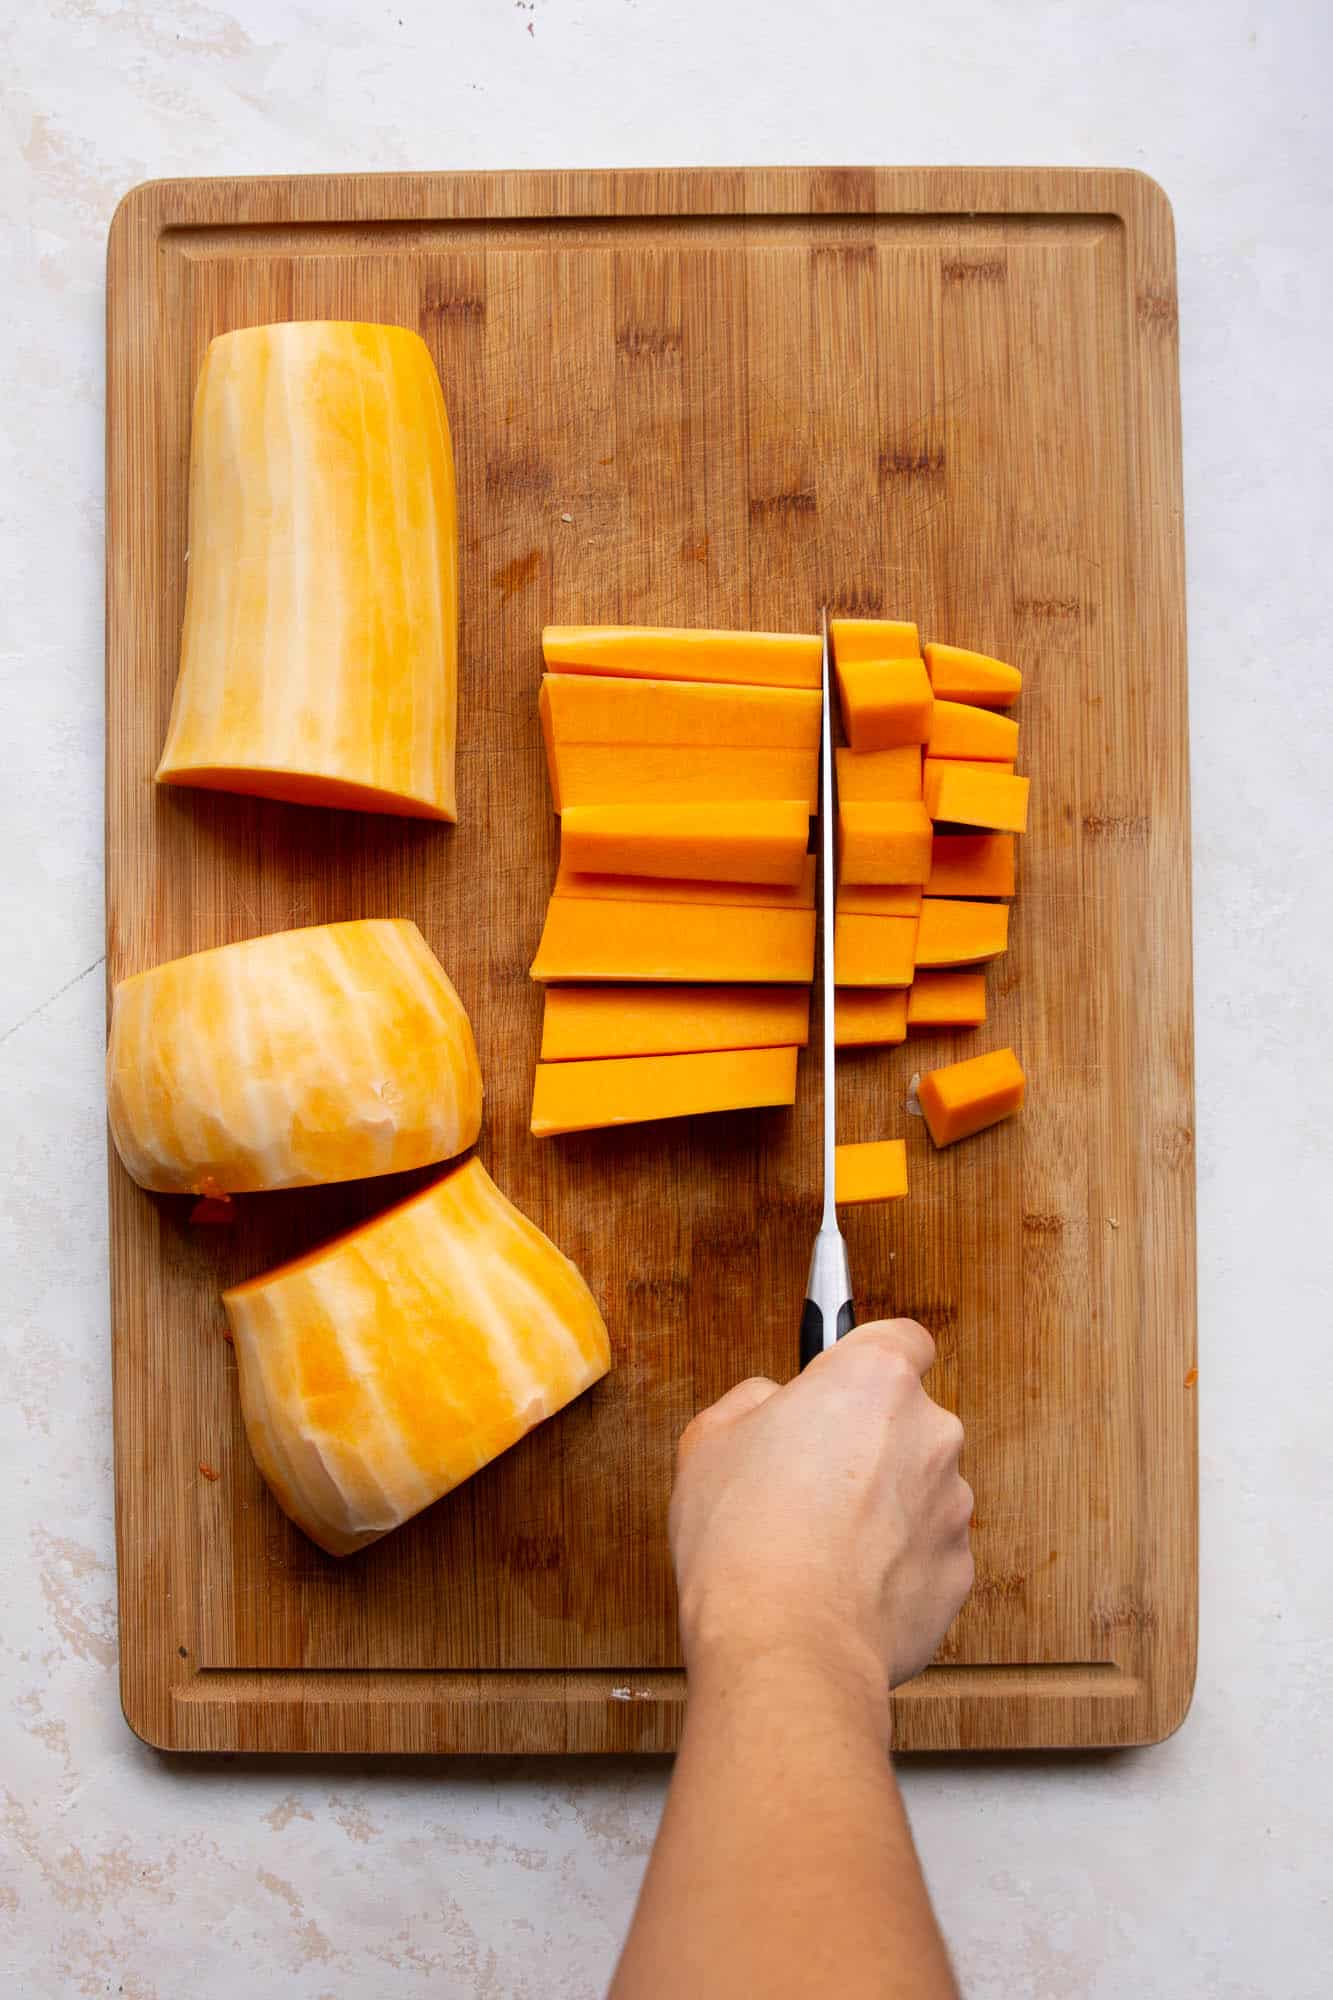 Lay the squash half on its flat side, and cut into three parts. The half ring portions will be harder to cut very evenly.